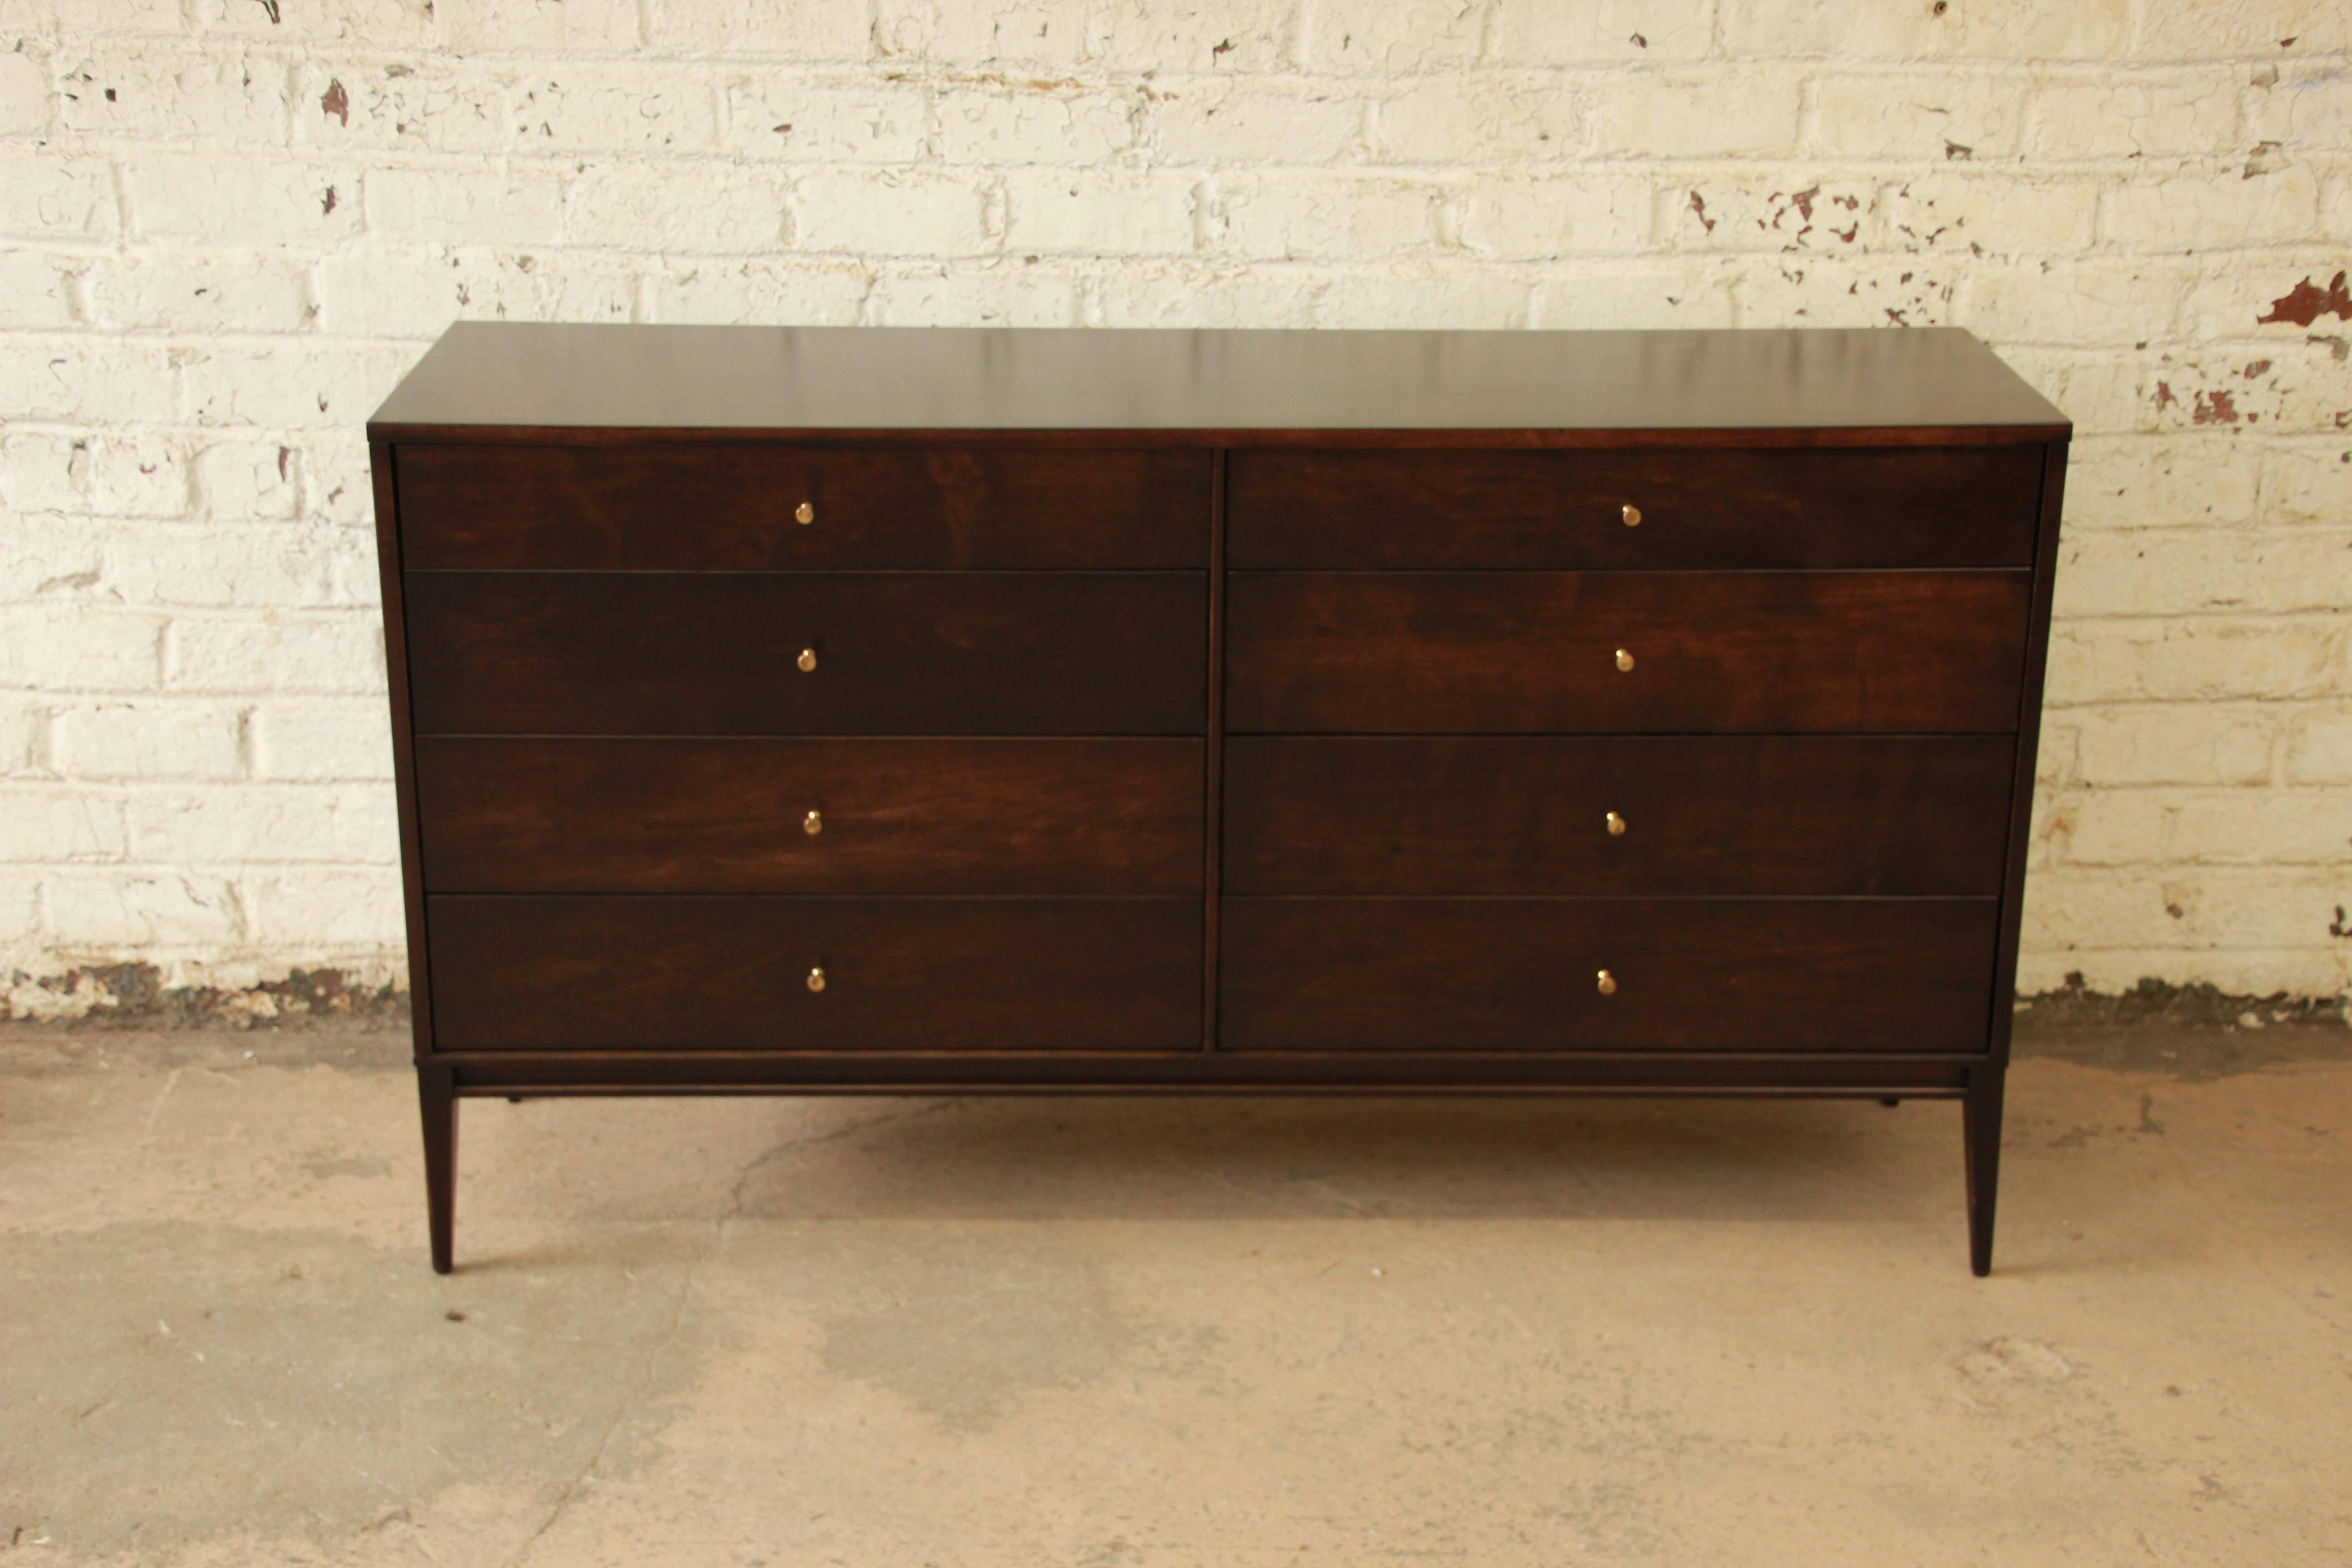 Eight-drawer dresser or credenza designed by Paul McCobb for the iconic Planner Group by Winchendon. The dresser features exceptional solid wood construction and a body raised on slim, tapered legs. The solid maple piece has been refinished in a